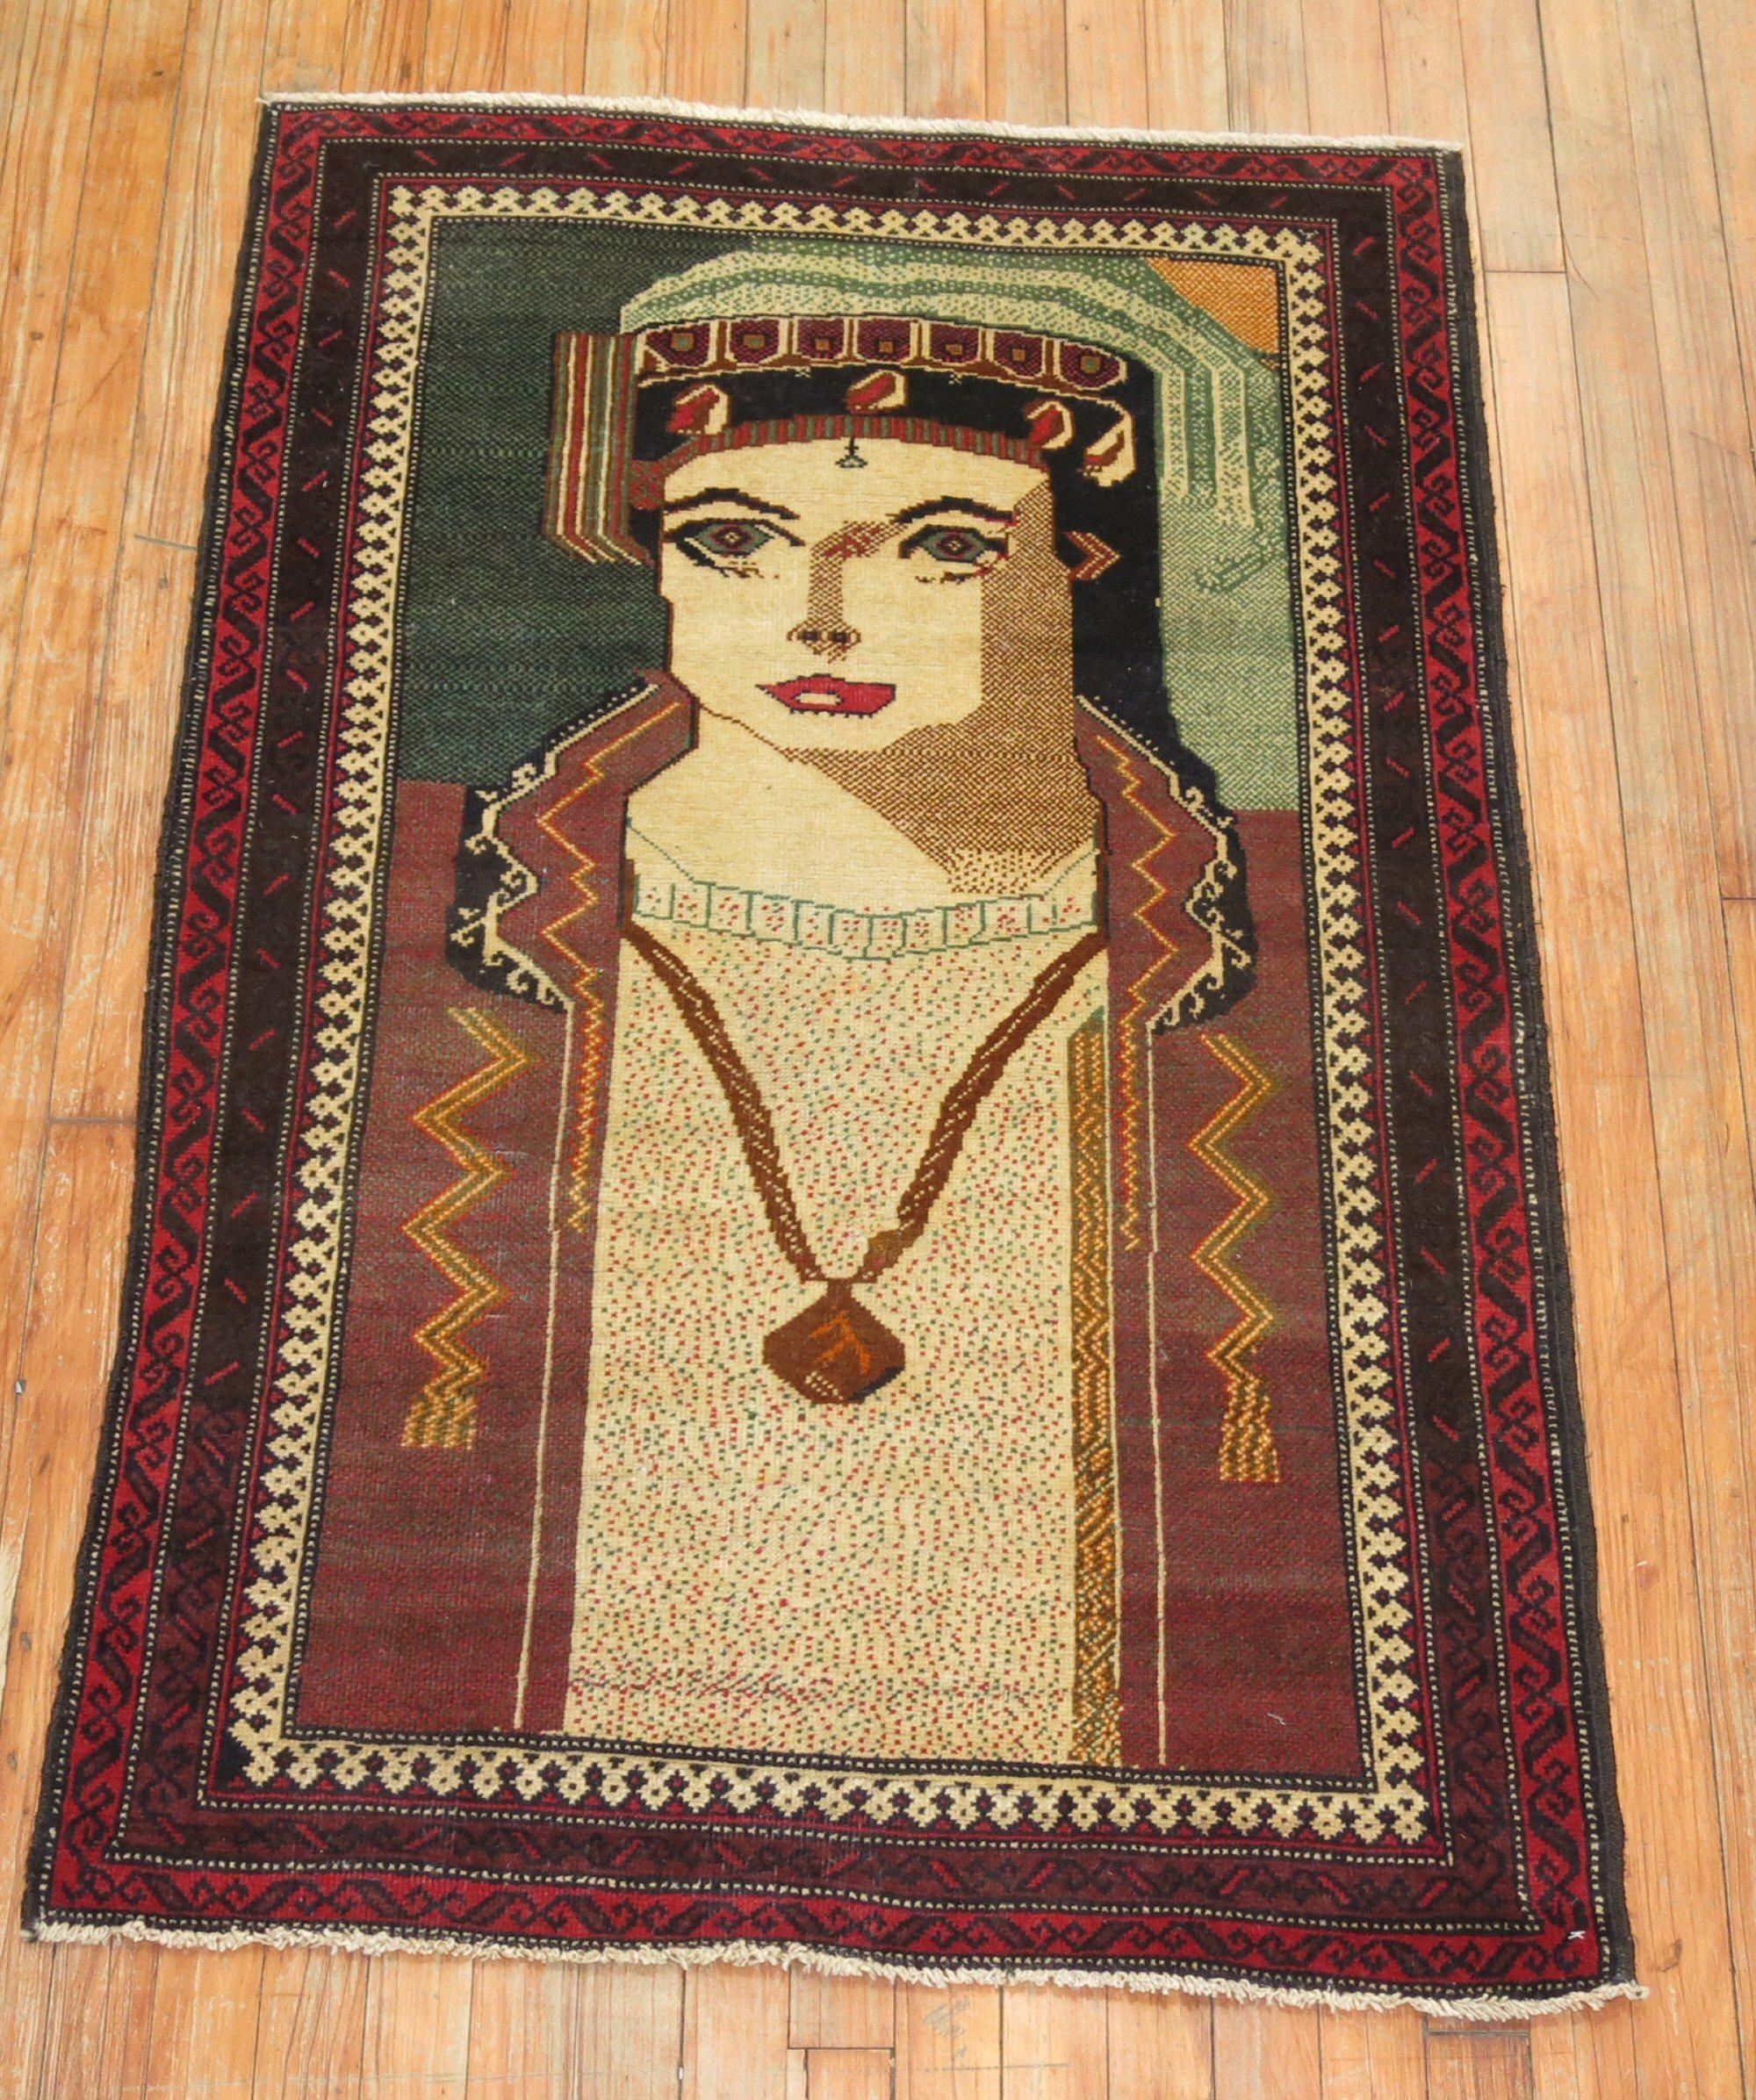 20th Century Hand Knotted Pictorial King of Pop Vintage Wool Persian Balouch Throw Rug